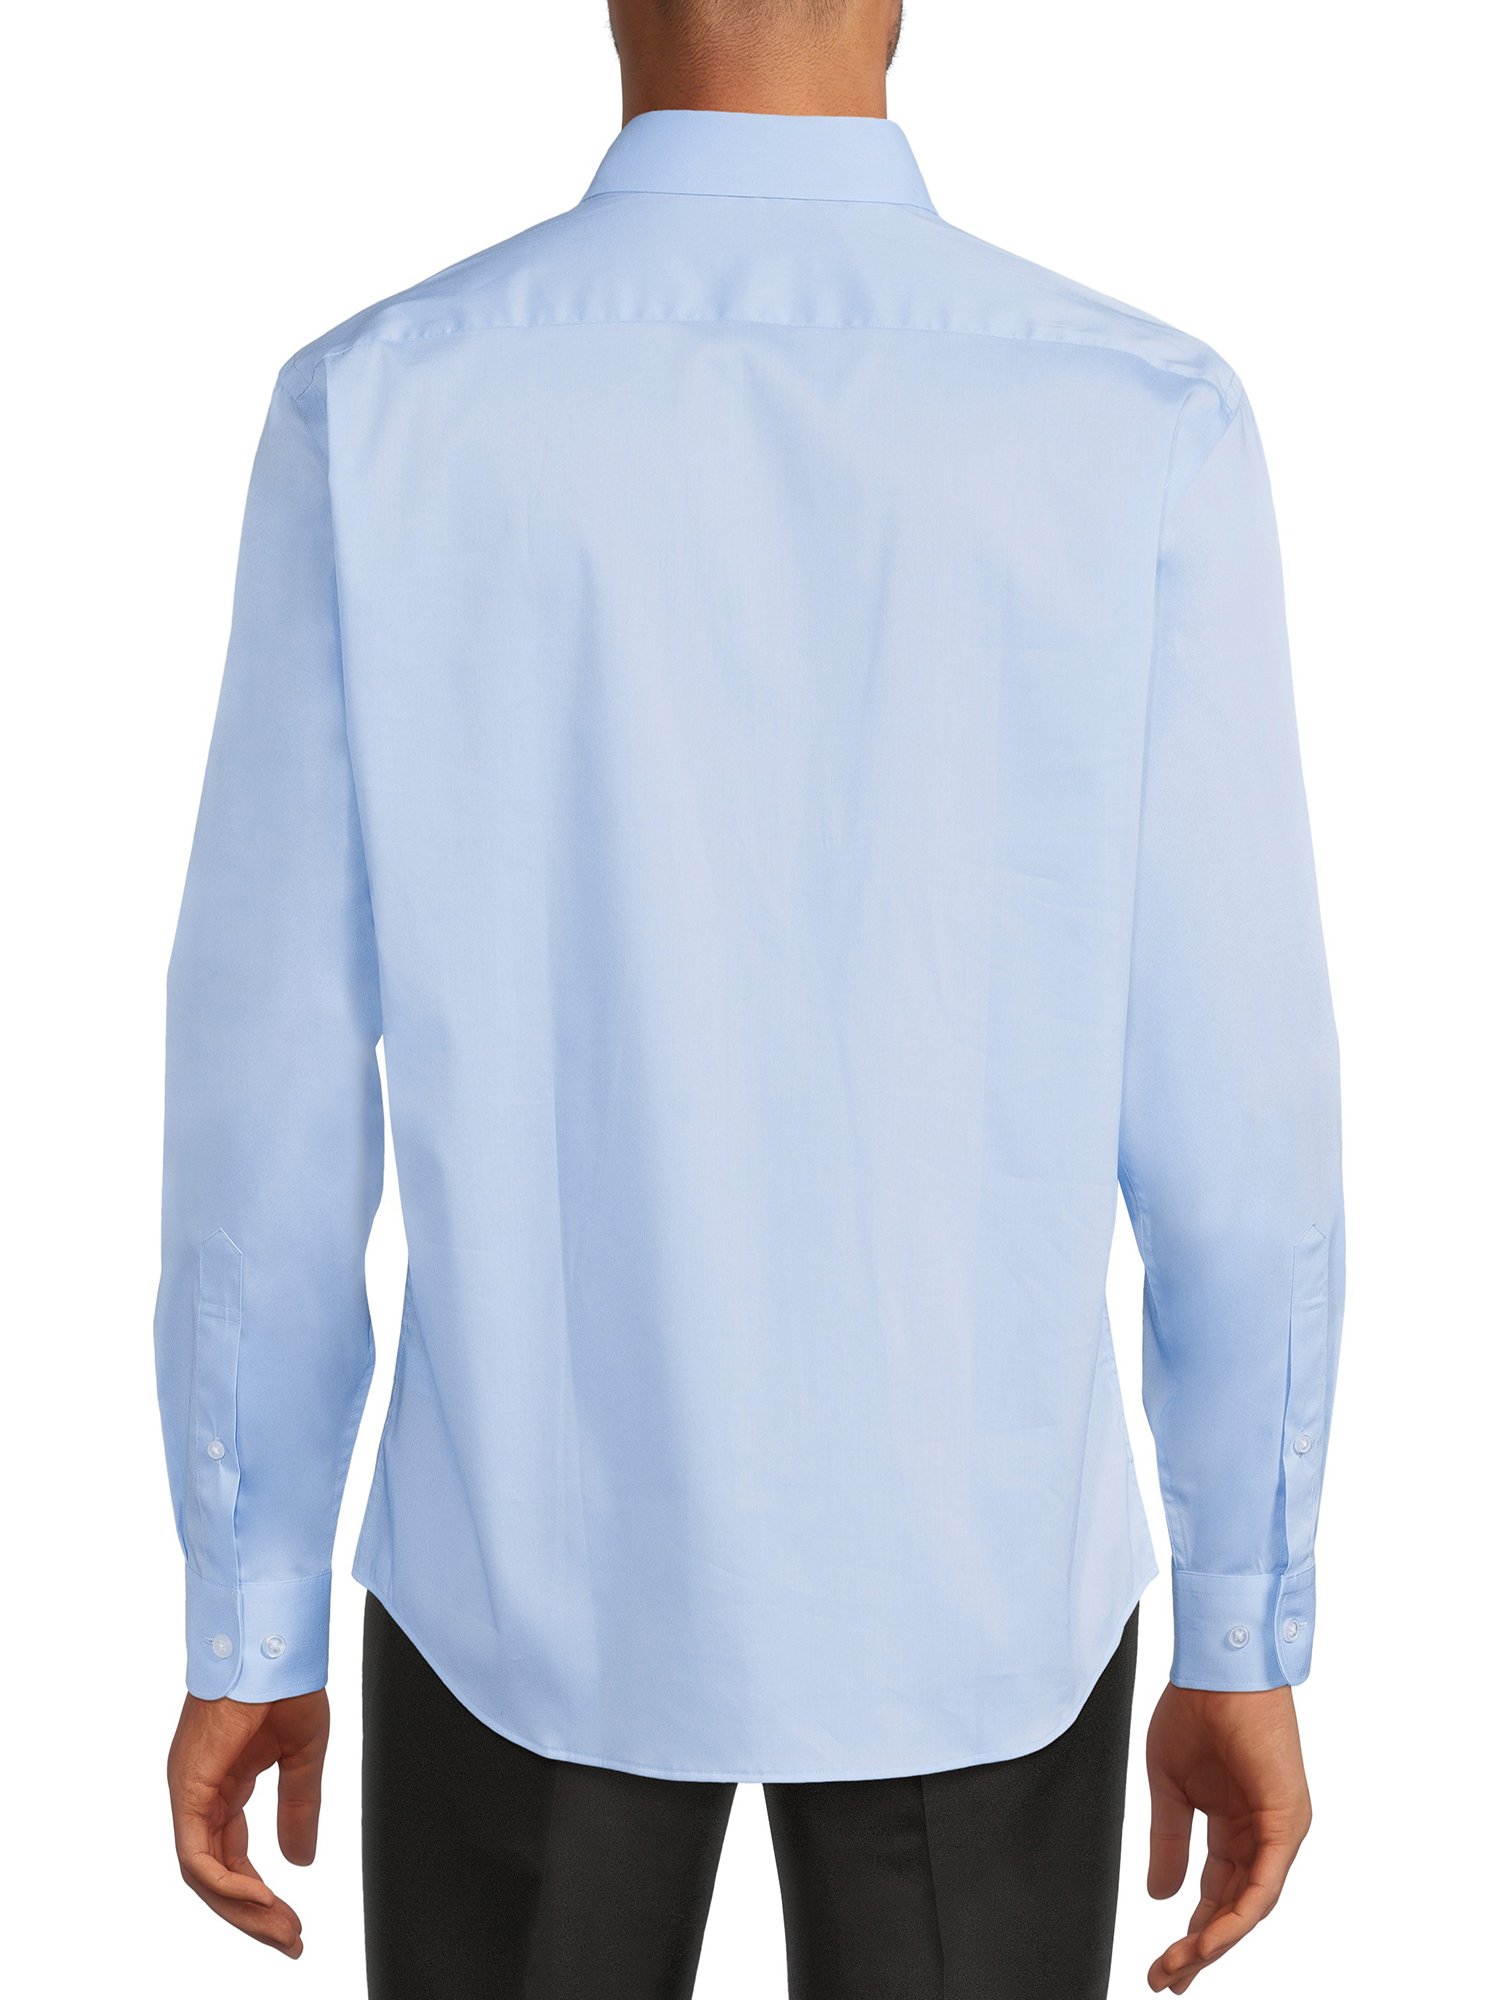 George Men's Classic Dress Shirt with Long Sleeves, Sizes S-3XL - image 3 of 5